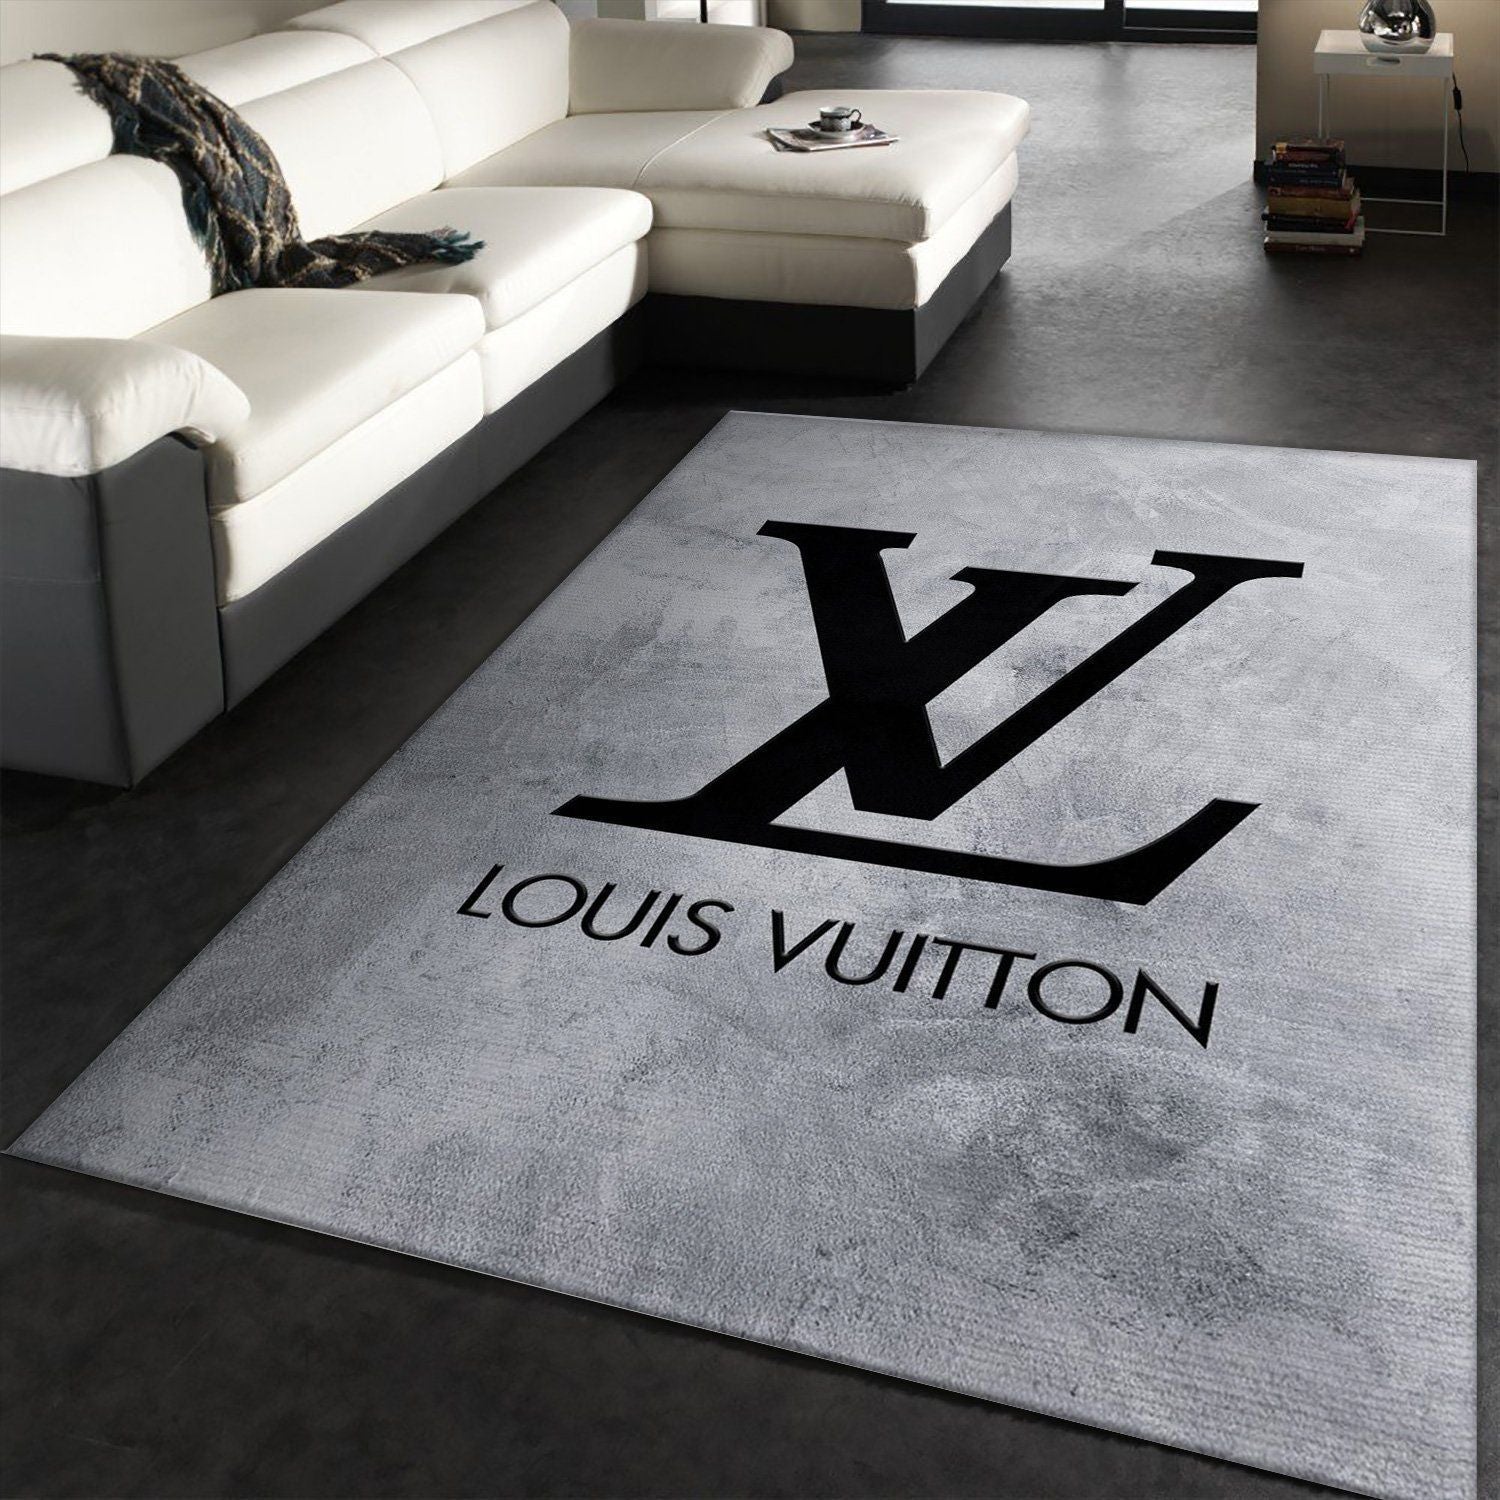 Louis vuitton gray living room carpet | Rosamiss Store – MY luxurious home